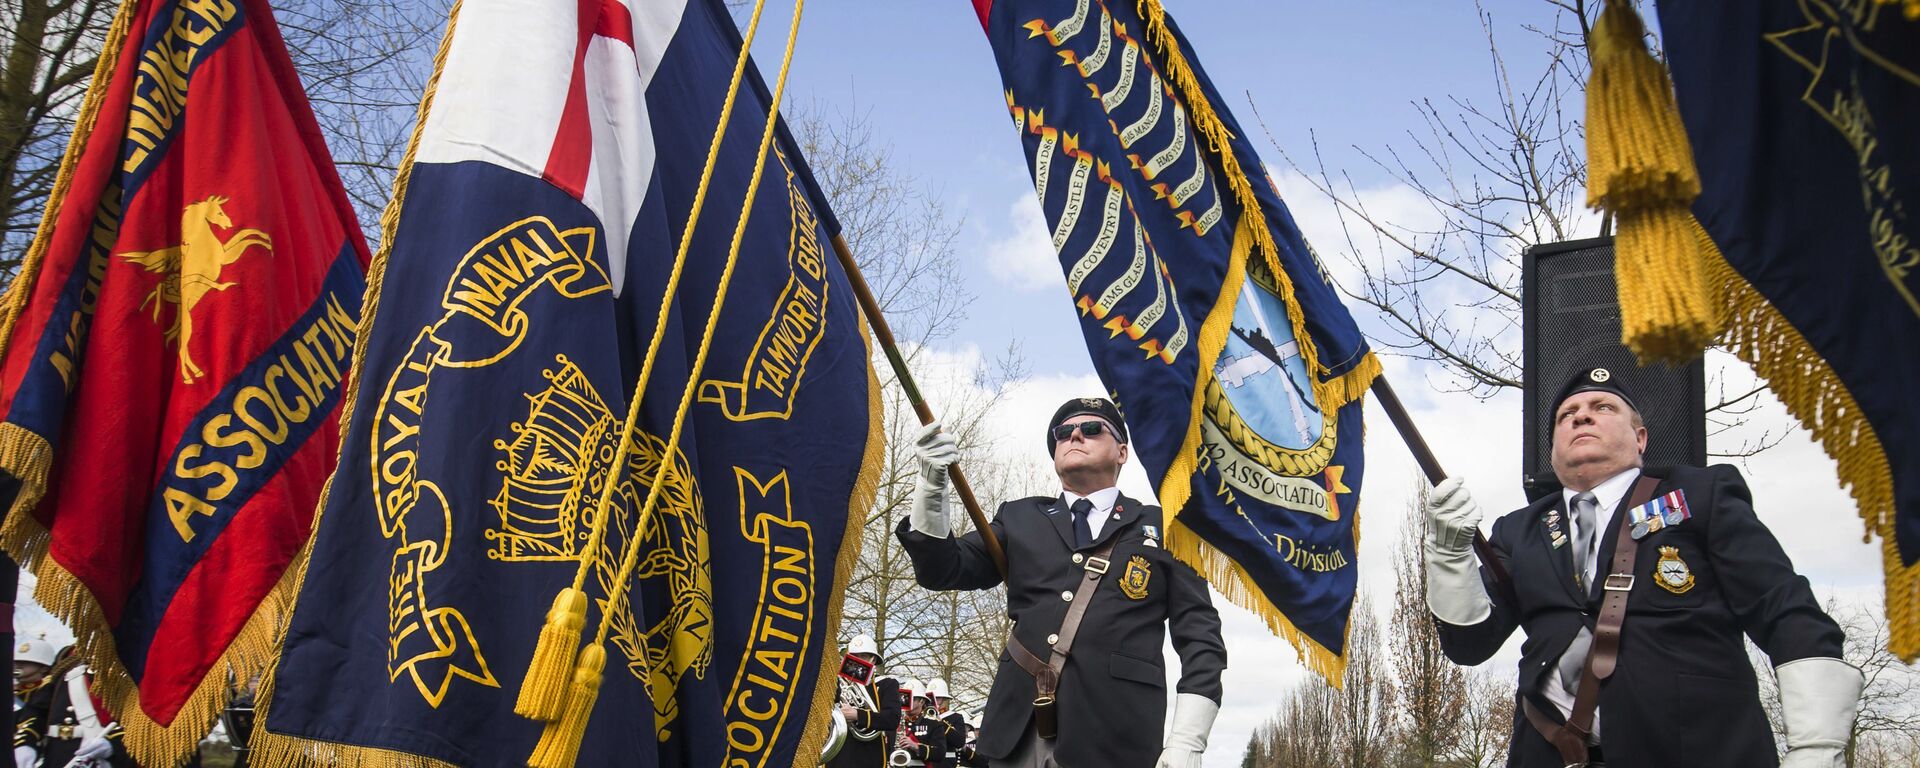 Military colours are displayed during a service marking the 35th anniversary of the Argentine invasion of the Falklands, at the National Memorial Arboretum in Staffordshire, England, Sunday April 2, 2017.  - Sputnik International, 1920, 08.02.2022